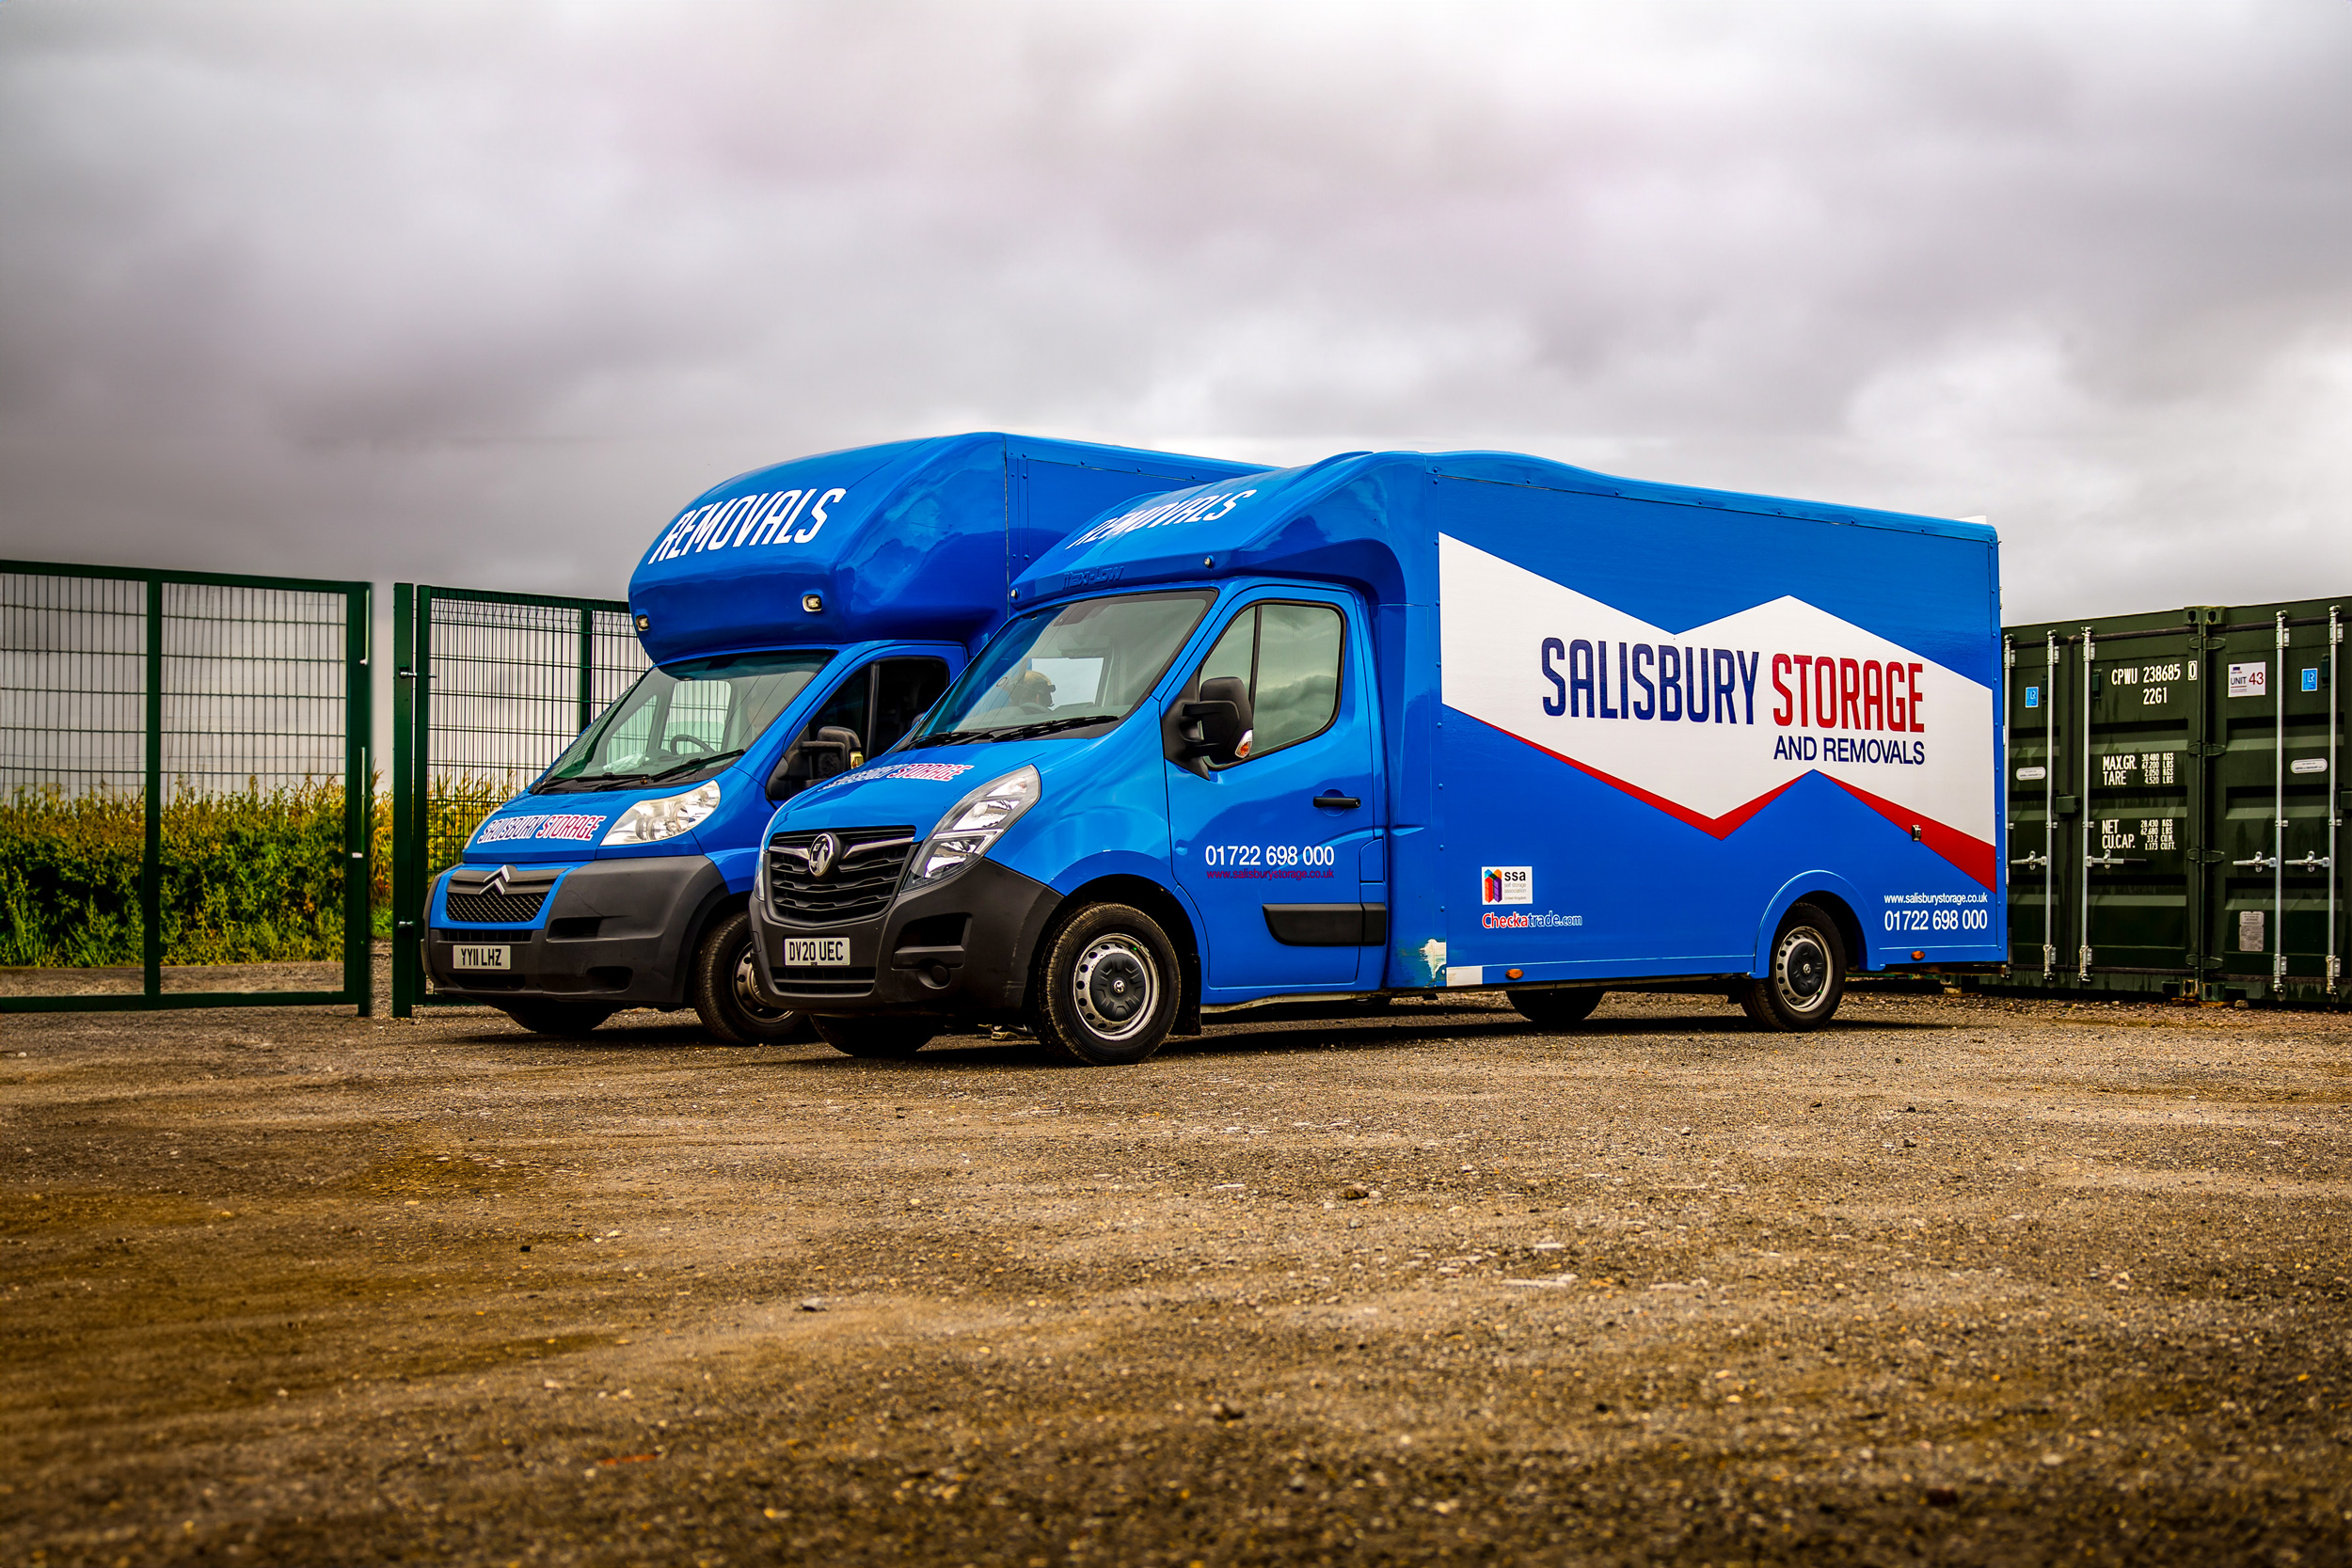 Two blue vans with the Salisbury storage and removals logo parked side by side in front of large storage containers.